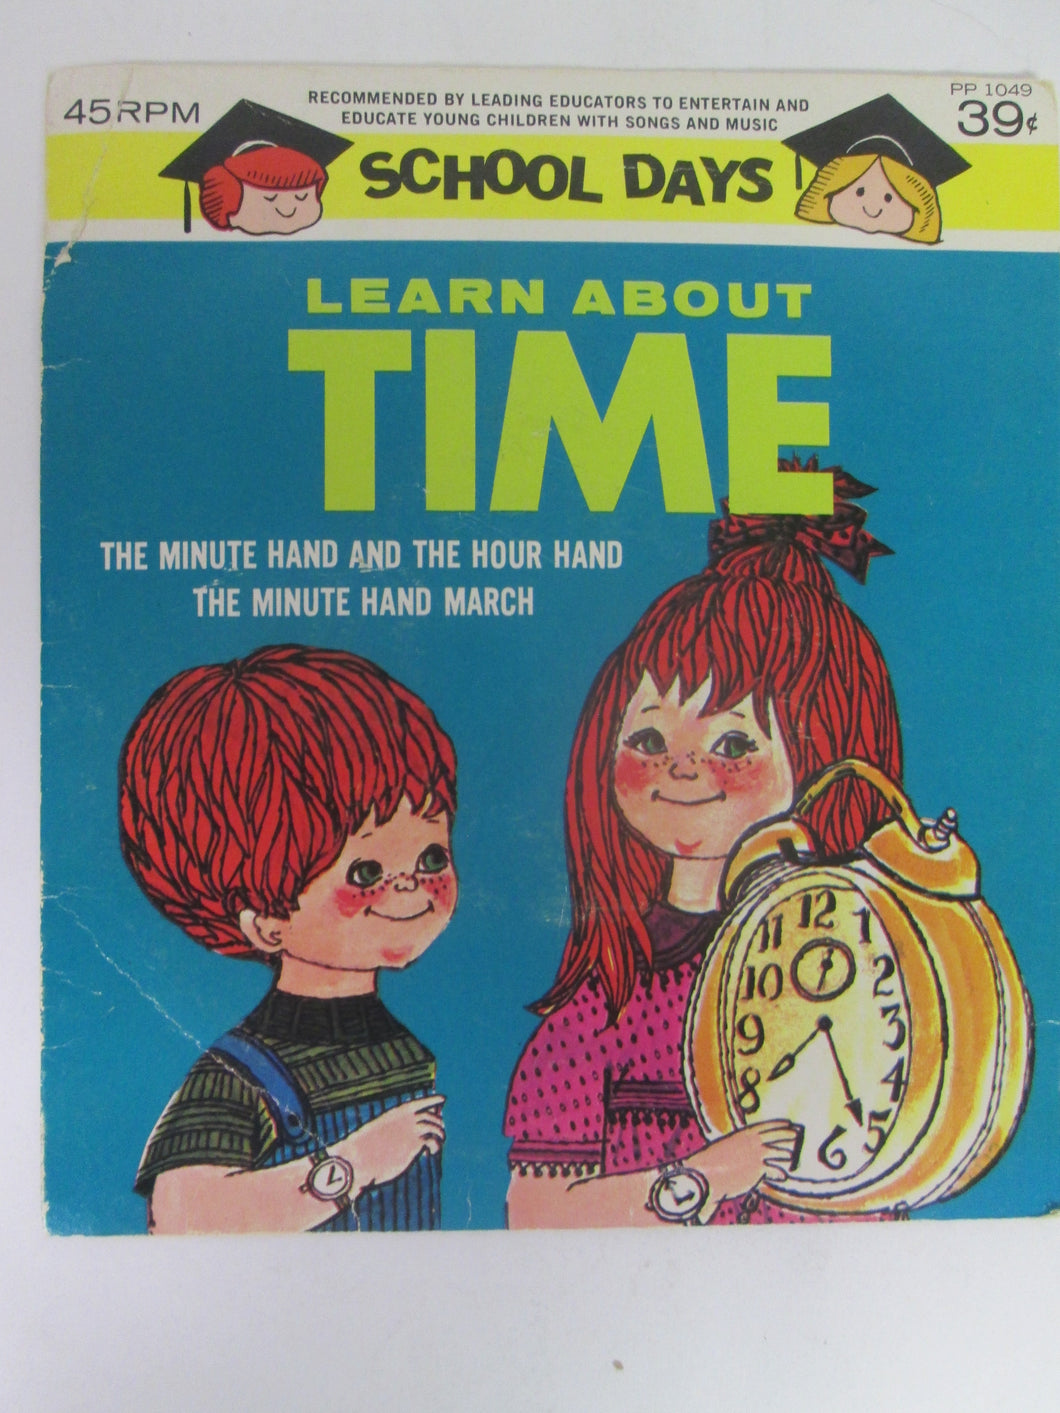 Learn About Time 45 RPM School Days Record PP1049